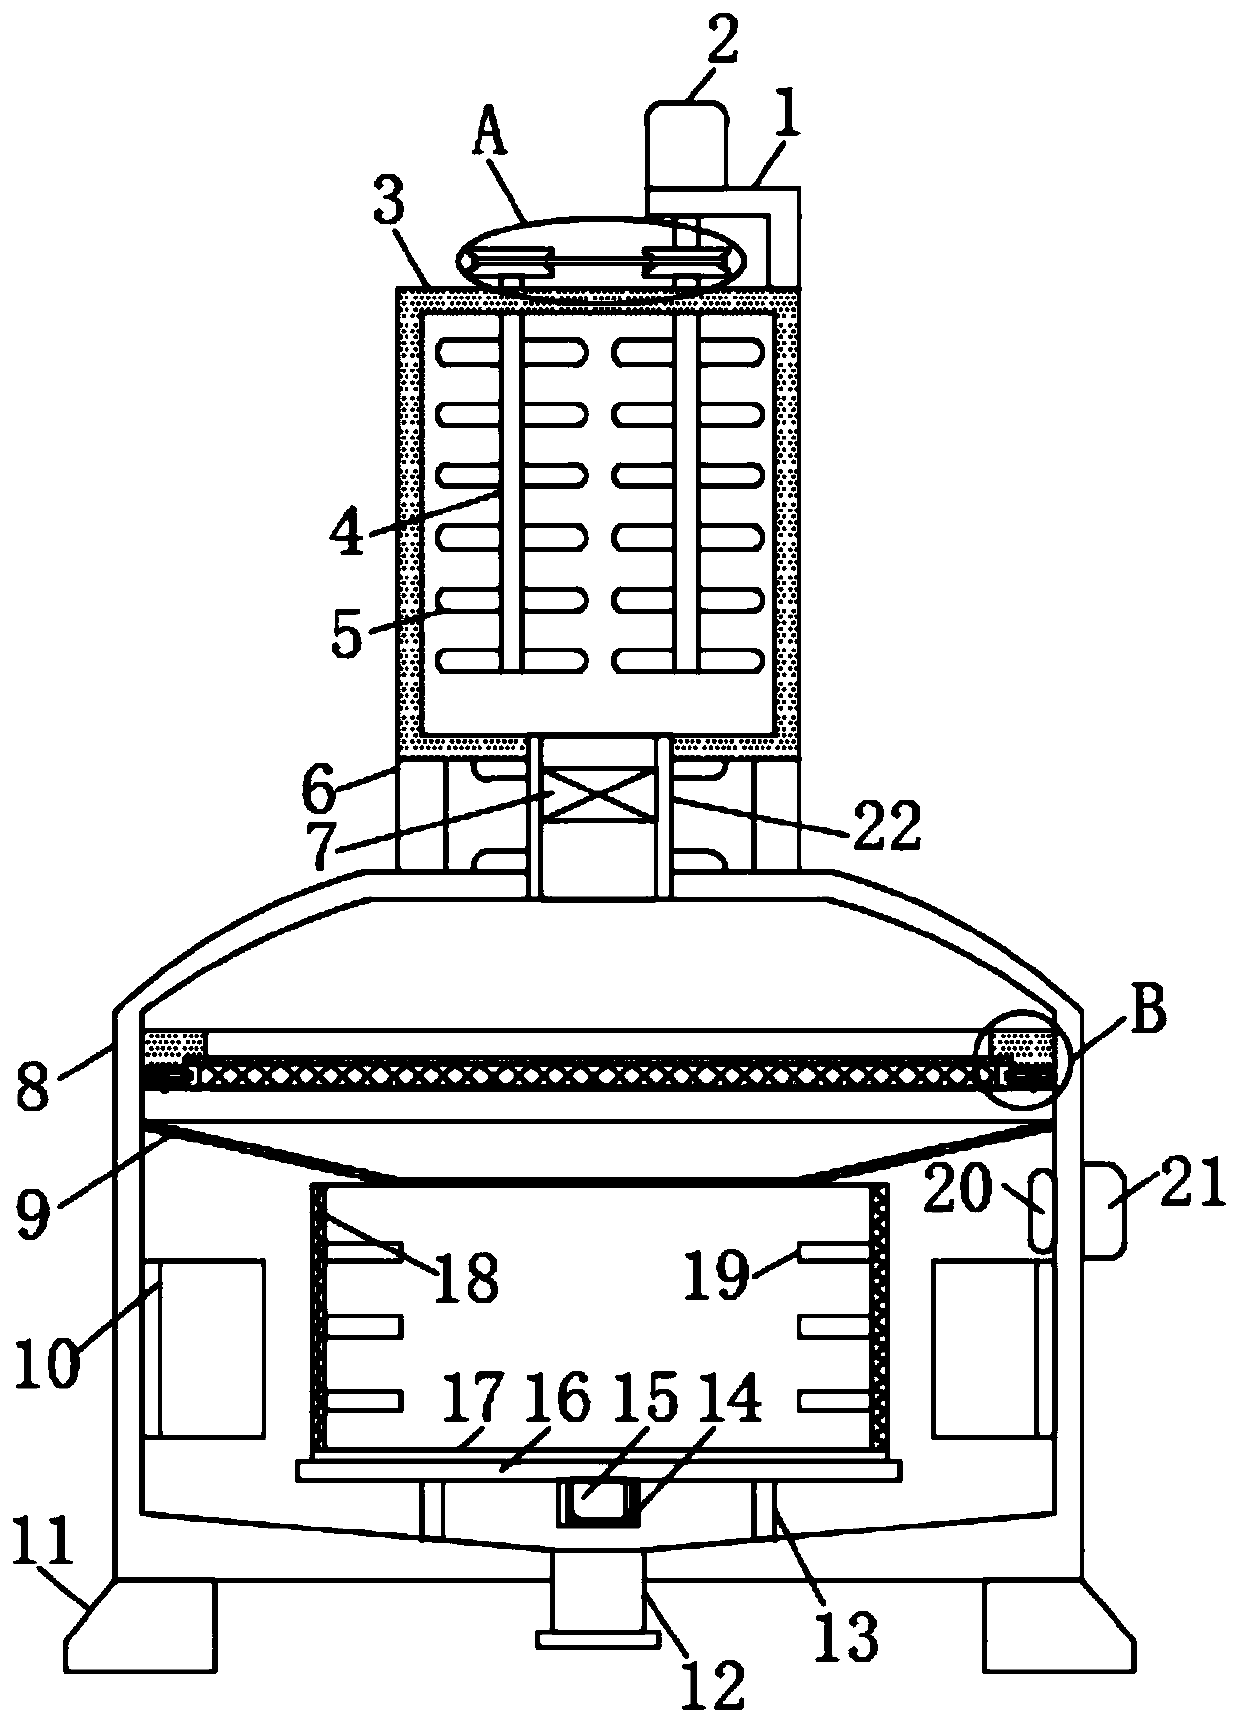 Two-in-one filtering device